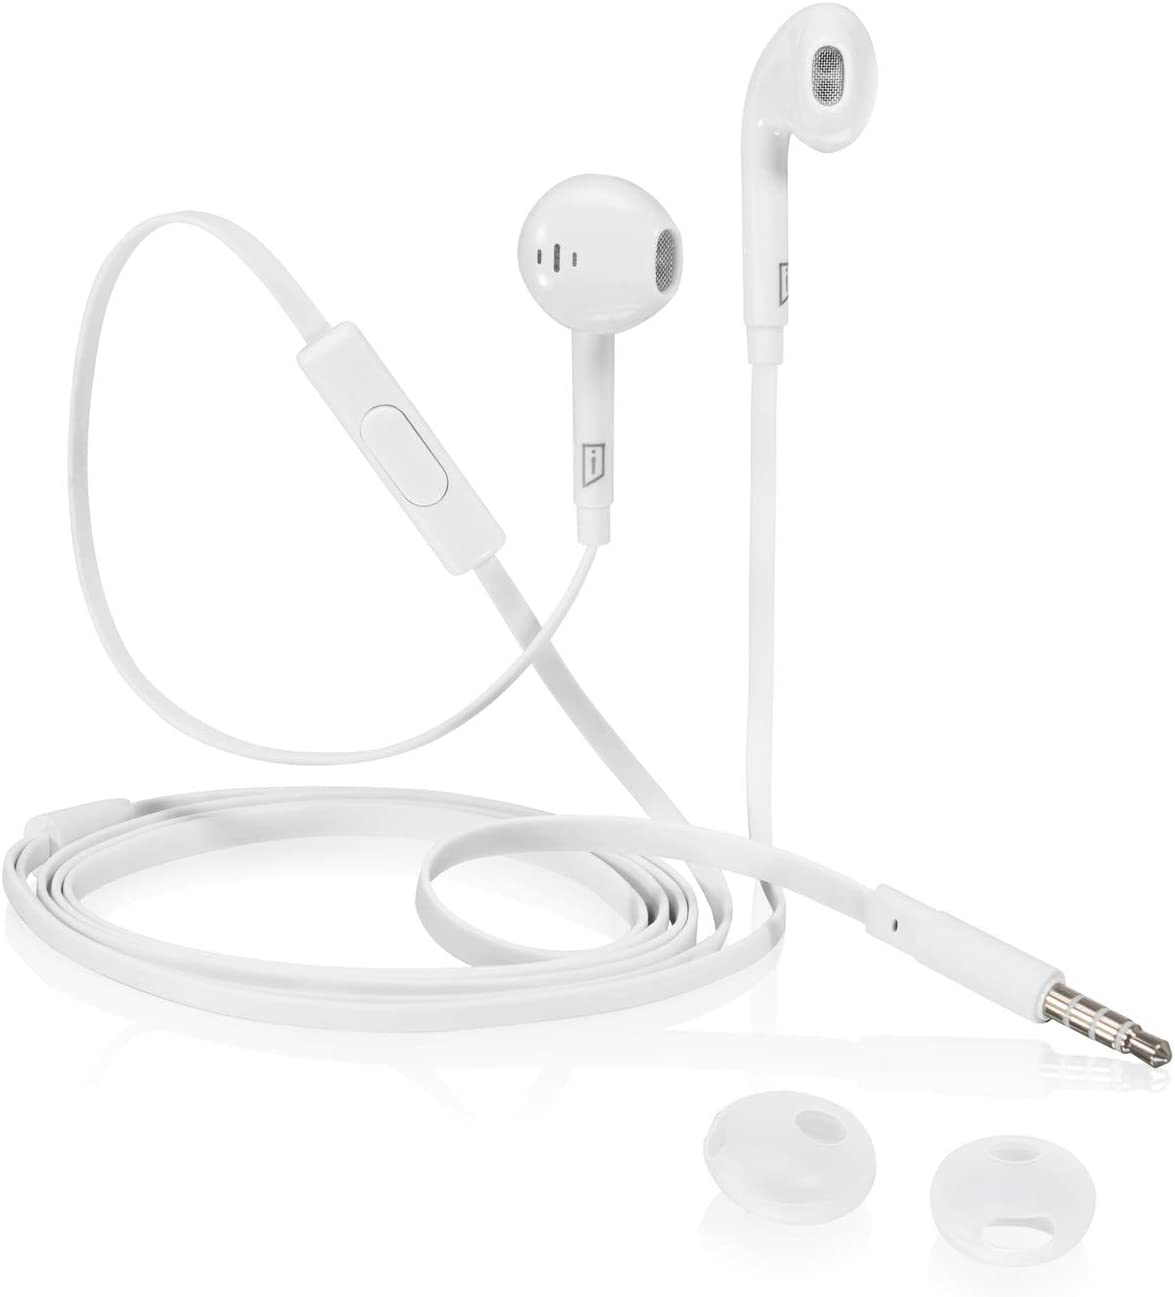 iStore Tangle Free Earbuds for Tablets, Laptops, iPhones, White (AEH036CAI)